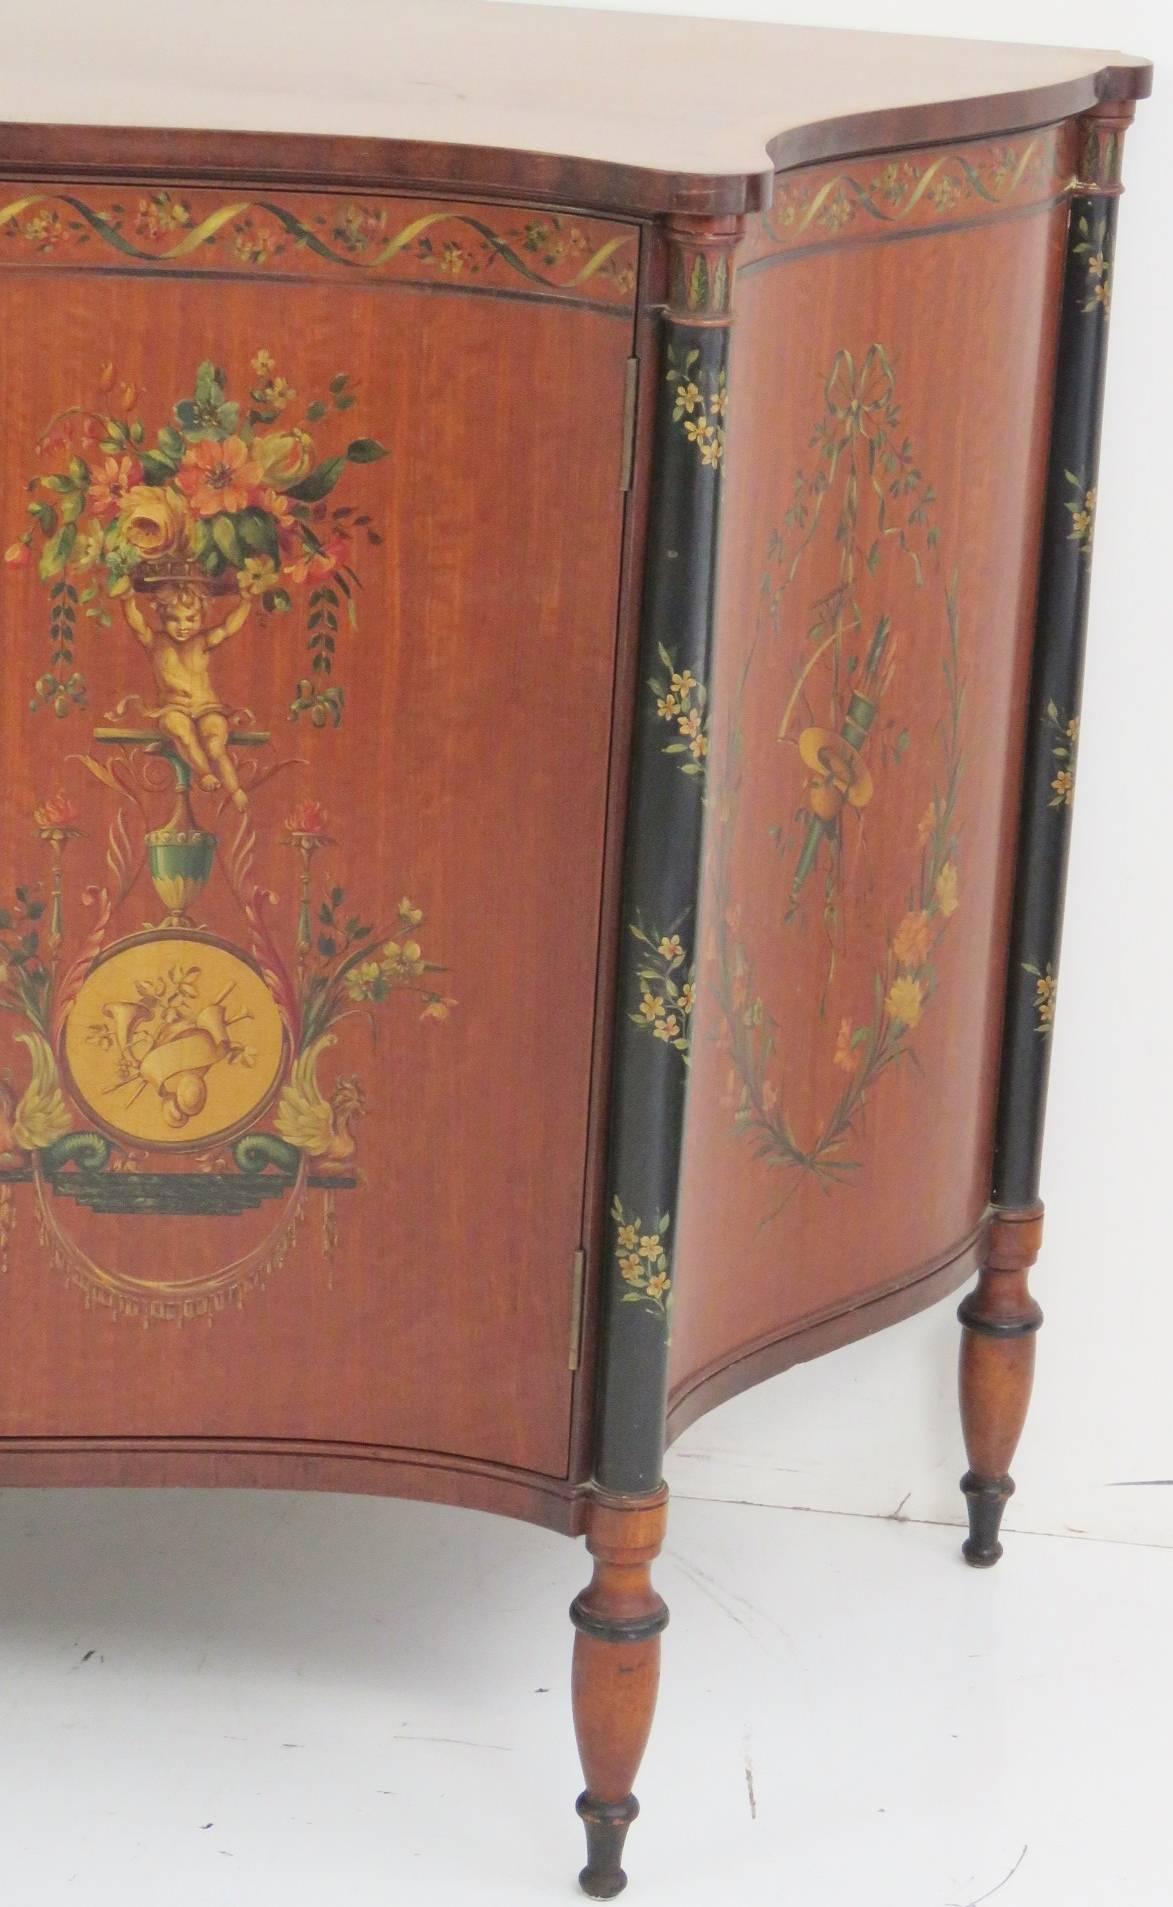 Floral paint decoration with puttis and musical instruments. Ebonized highlights. Drawers on the inside.